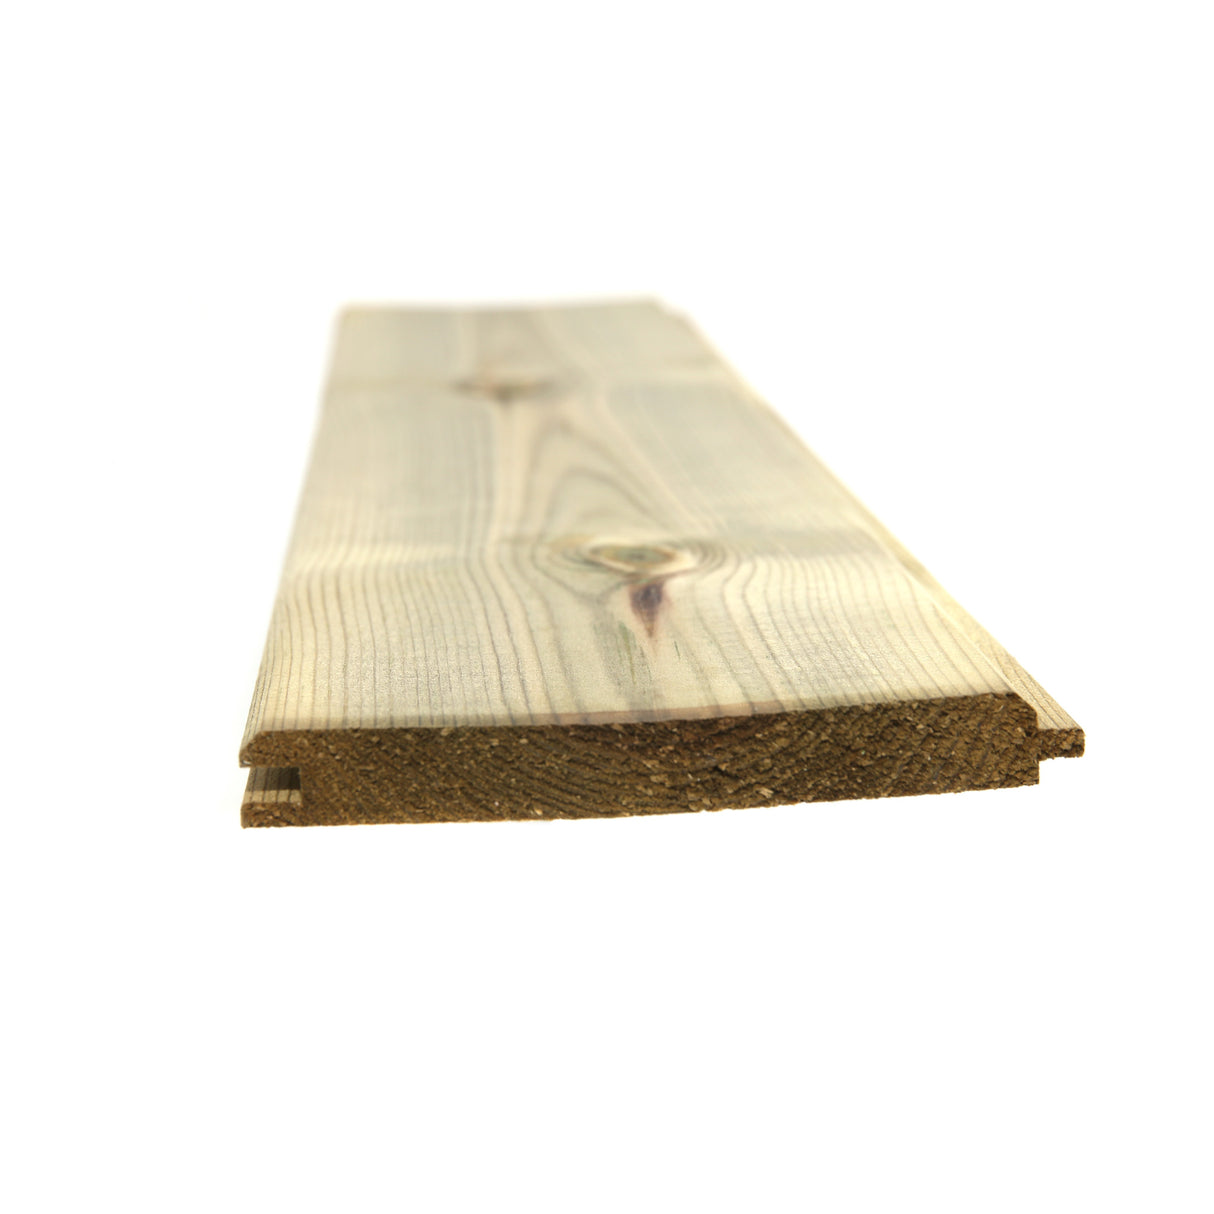 Green Treated Tongue and Groove TGV External Wood Cladding - 14 x 113mm Finished Size (2168258658352)